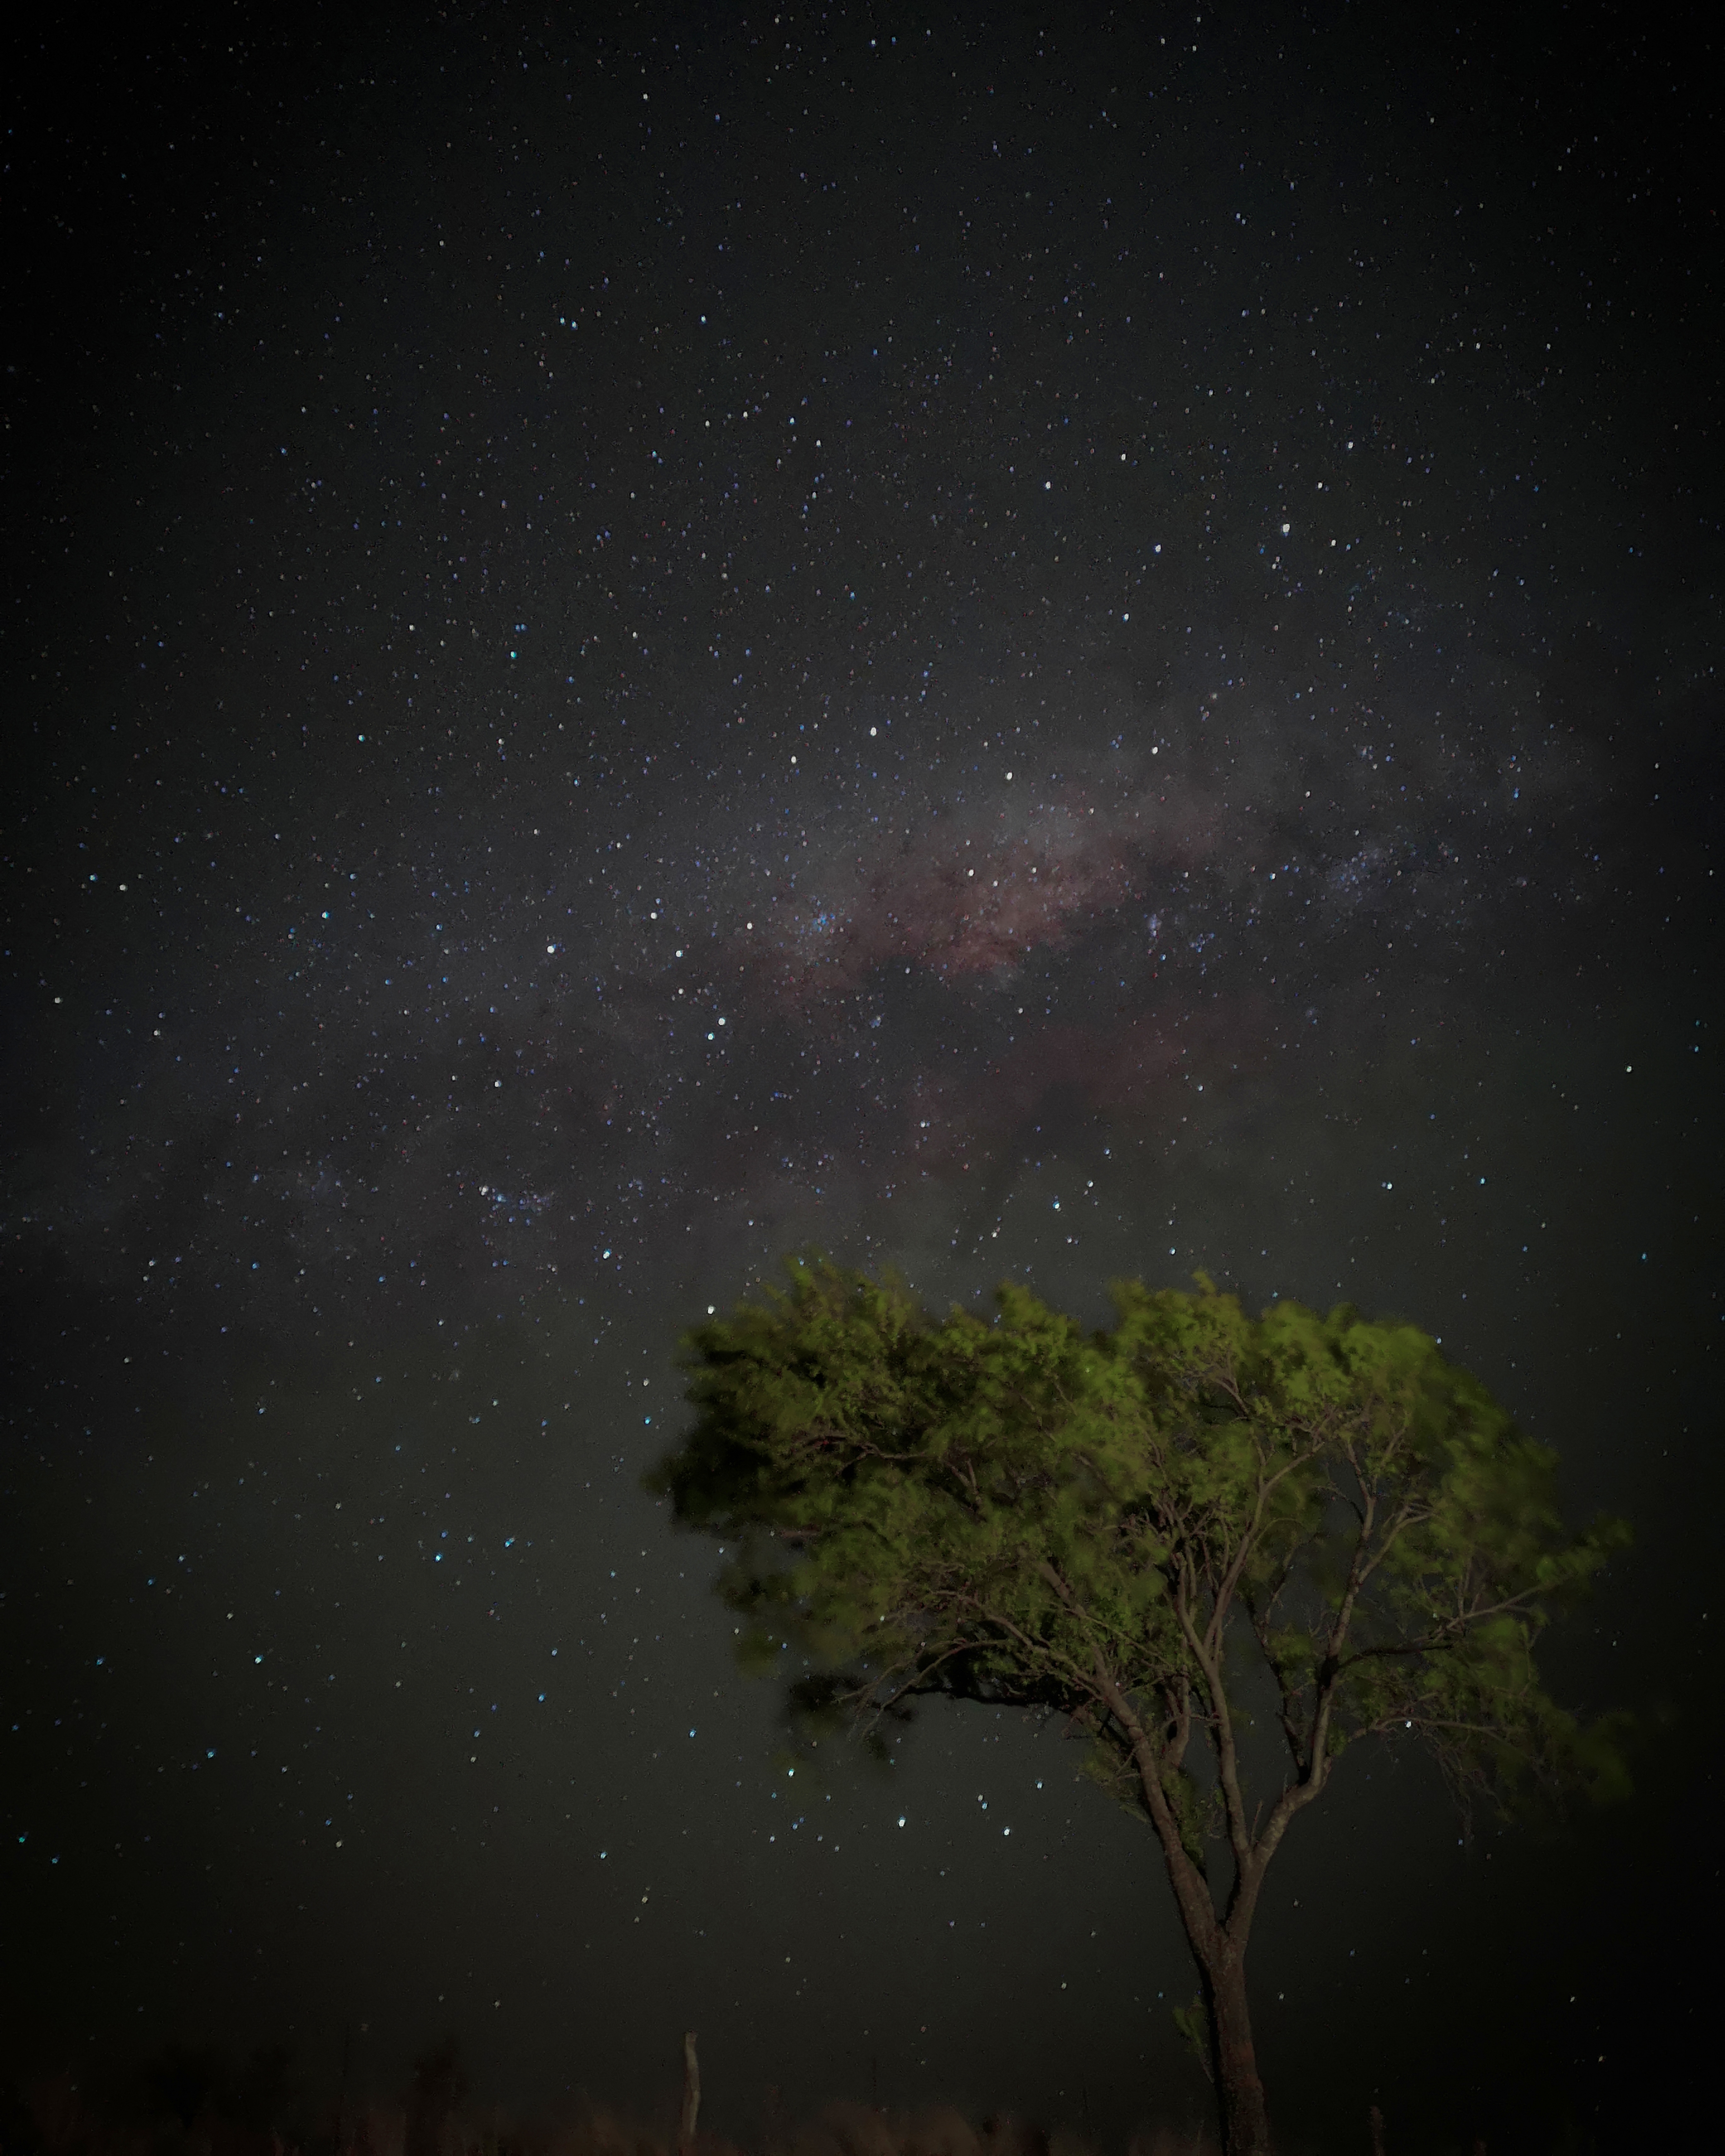 Milky Way shot on a phone